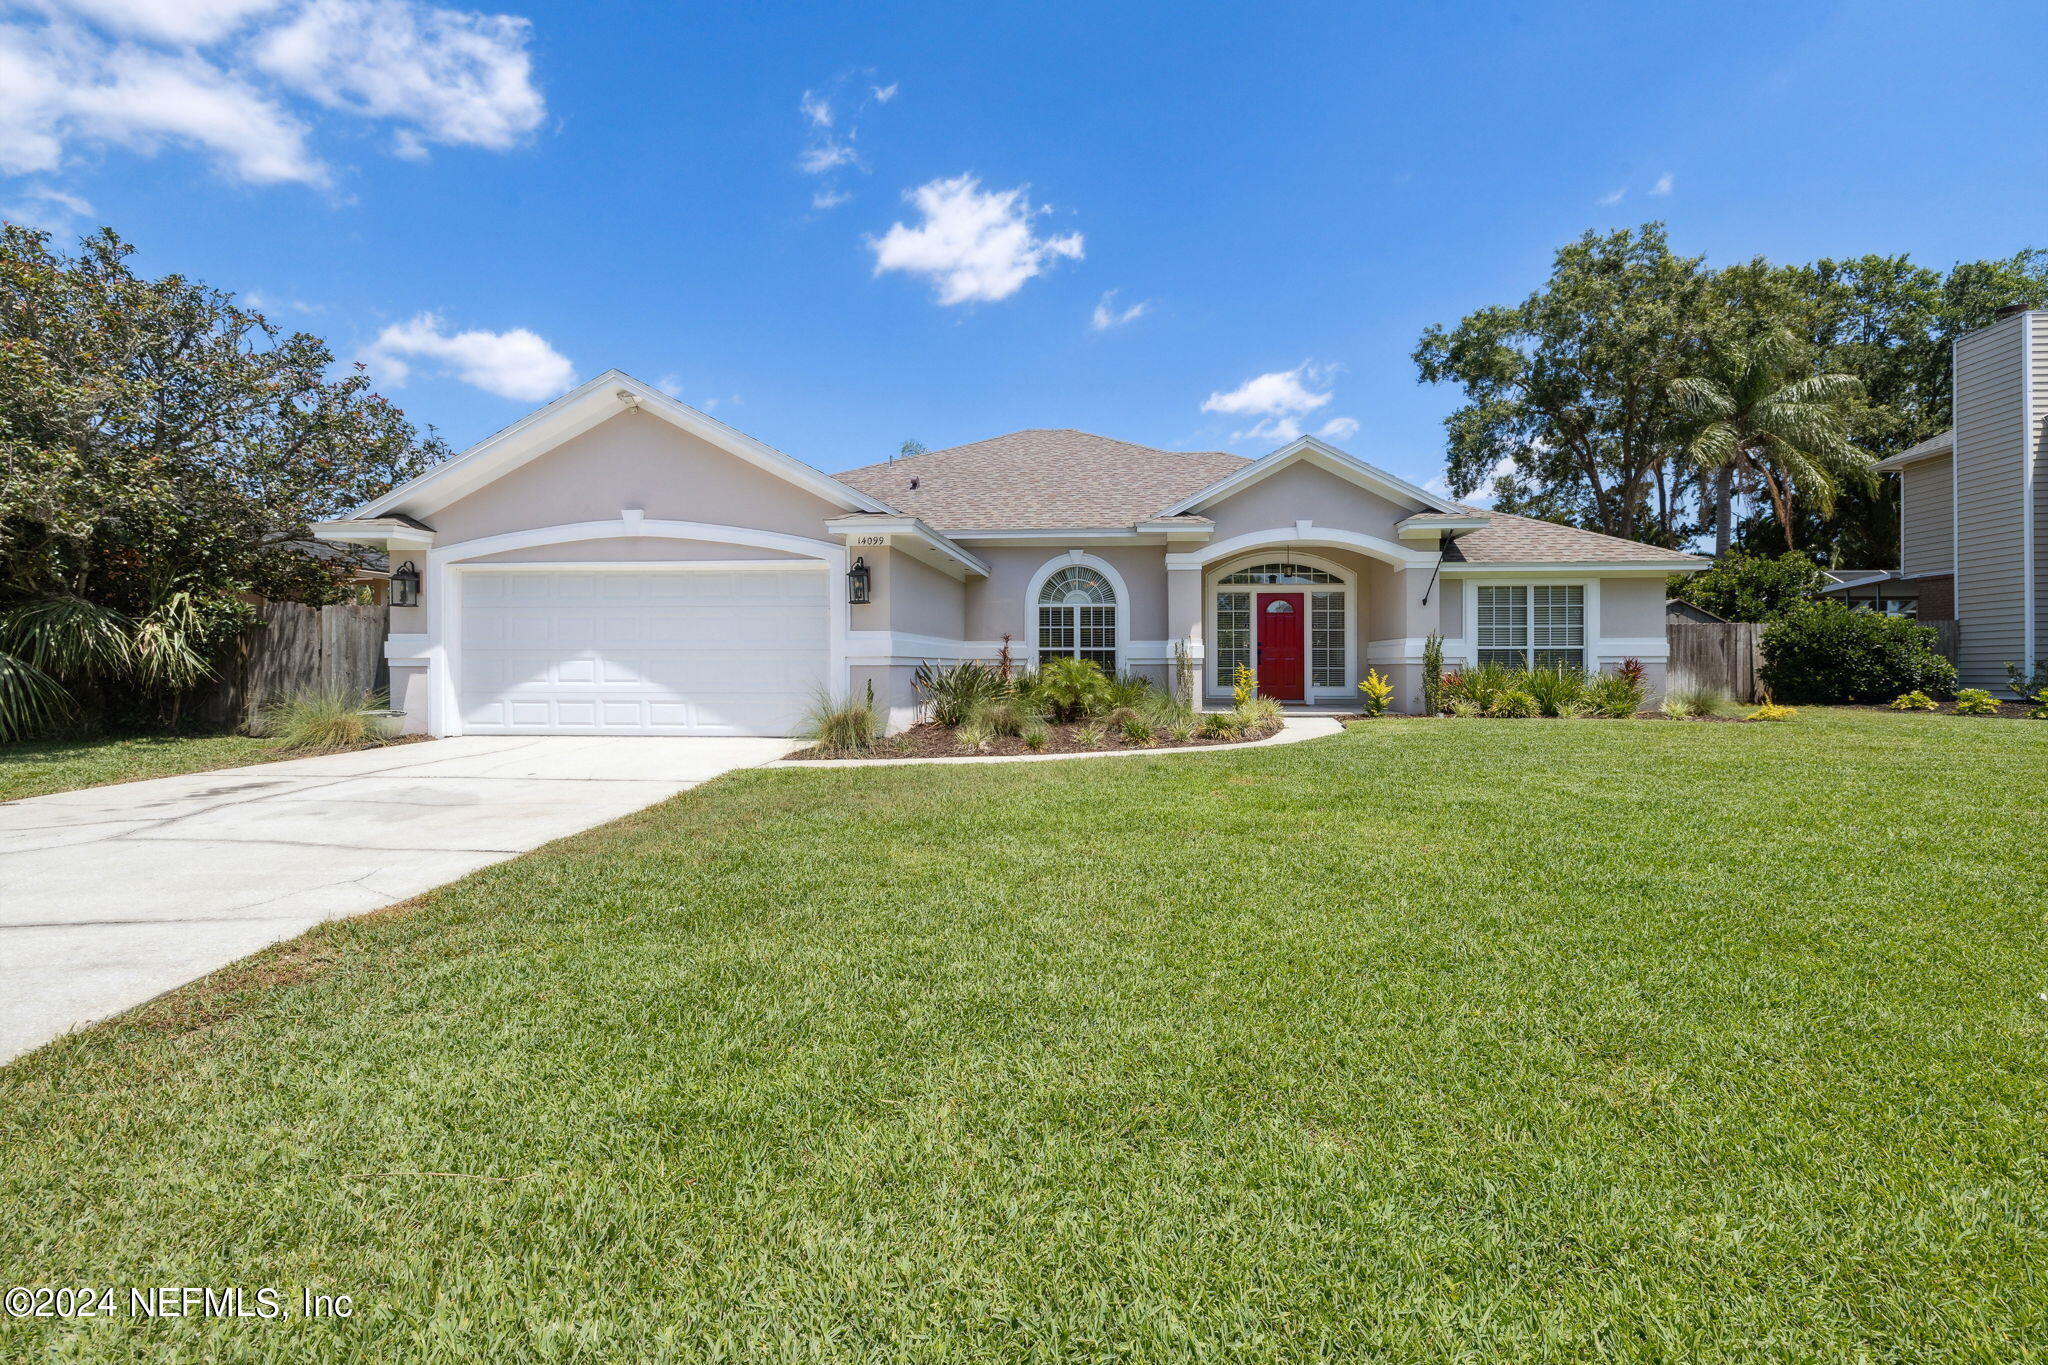 Jacksonville, FL home for sale located at 14099 W Waverly Falls Lane, Jacksonville, FL 32224